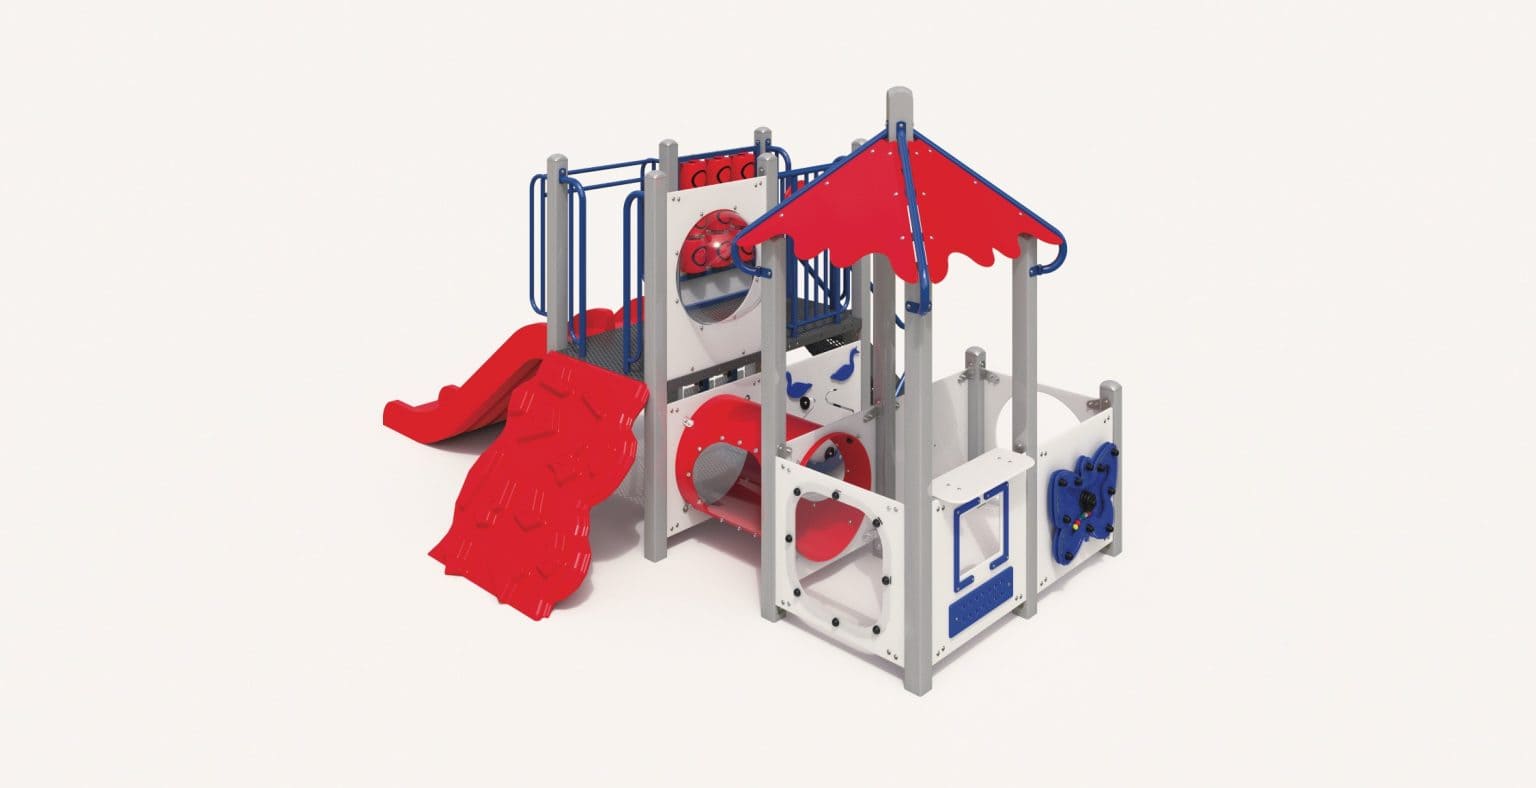 Main myths when implementing a playground in a daycare